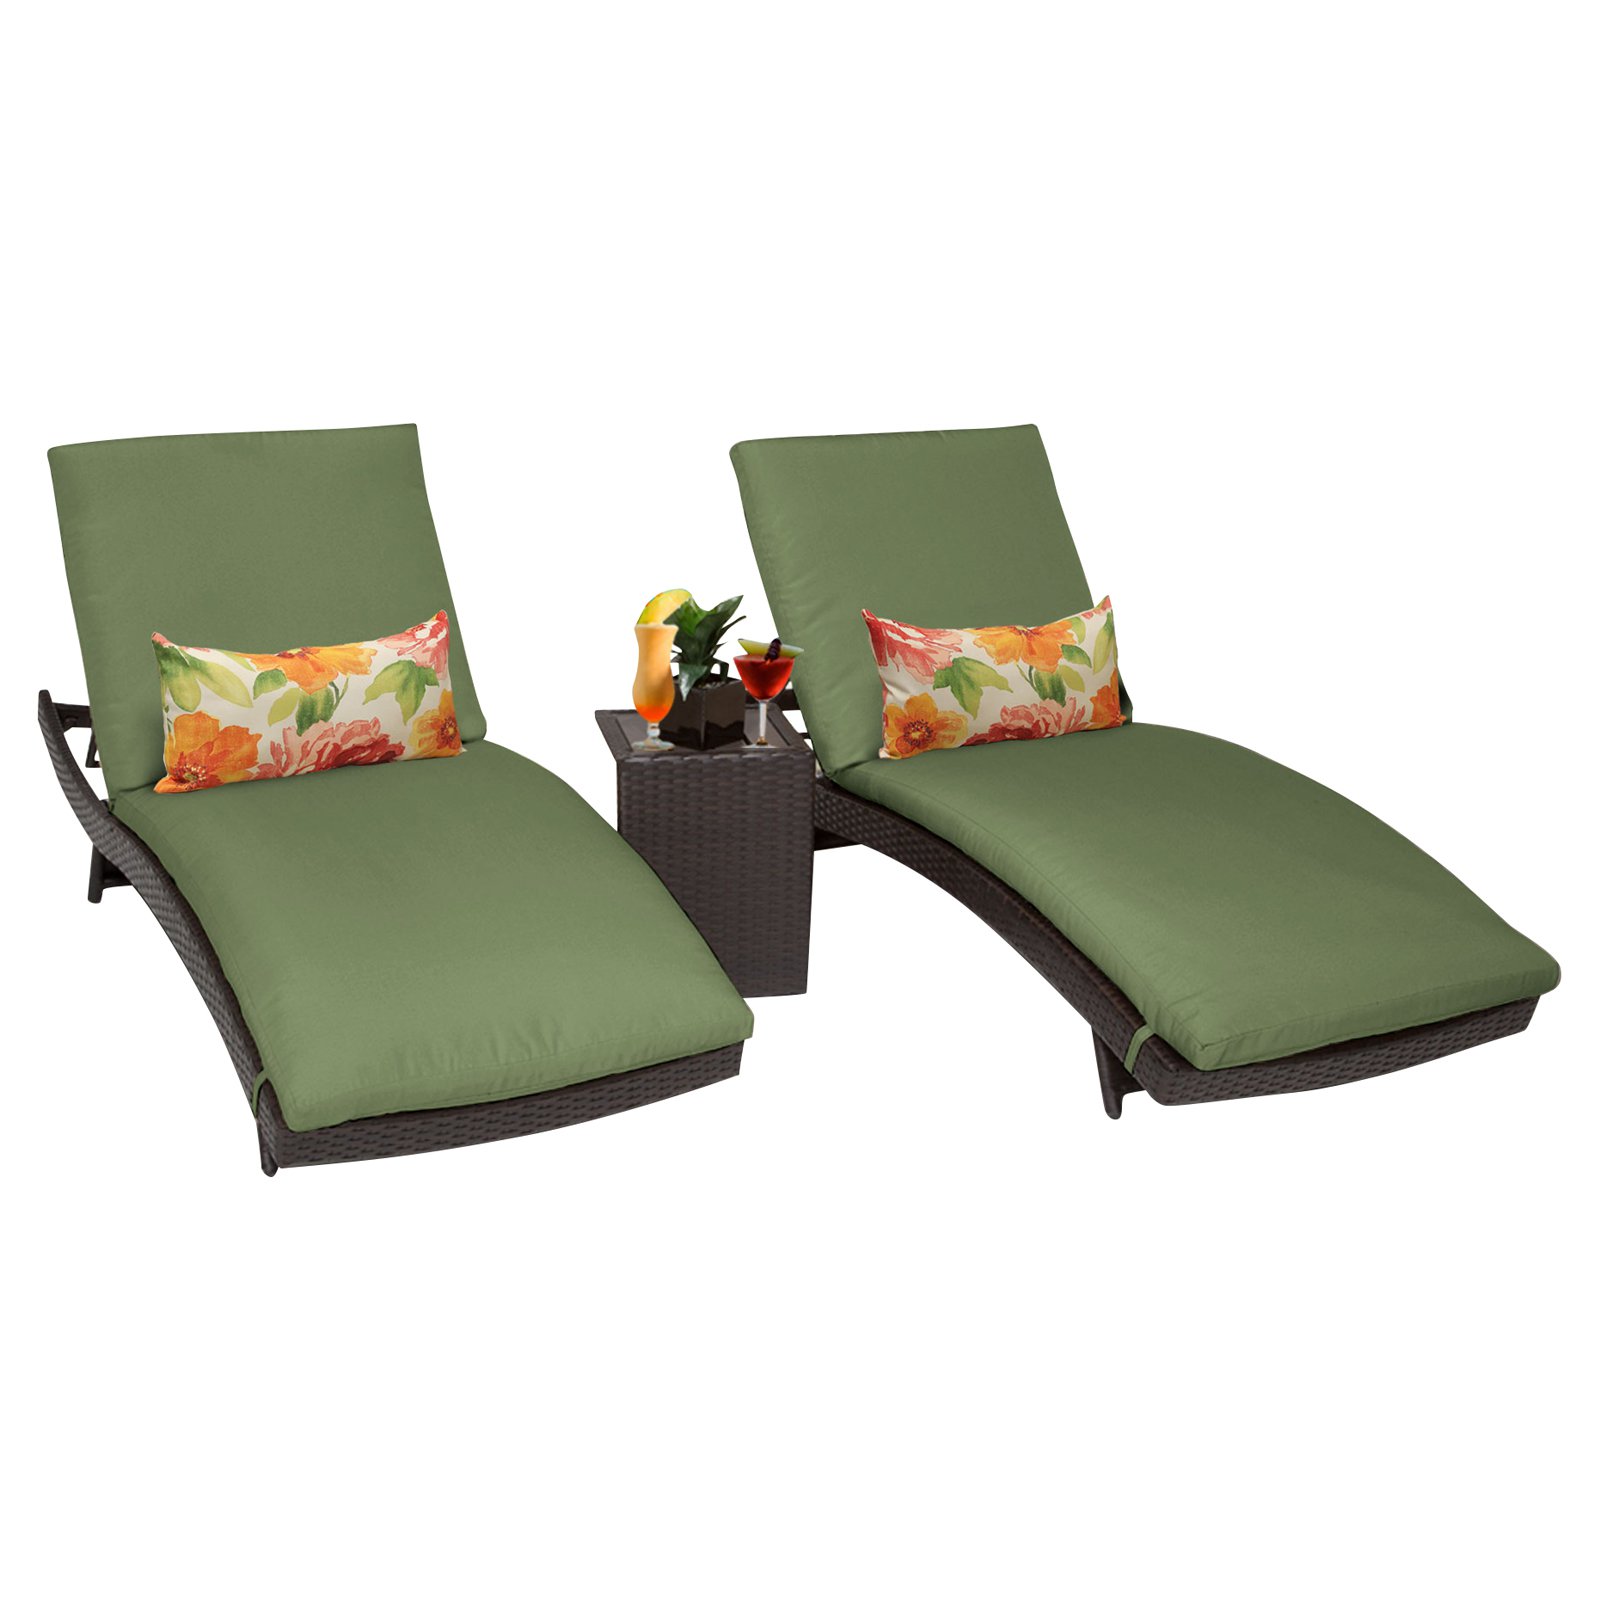 Barbados Curved Chaise Outdoor Wicker Patio Furniture in Cilantro (Set of 2) - image 1 of 4